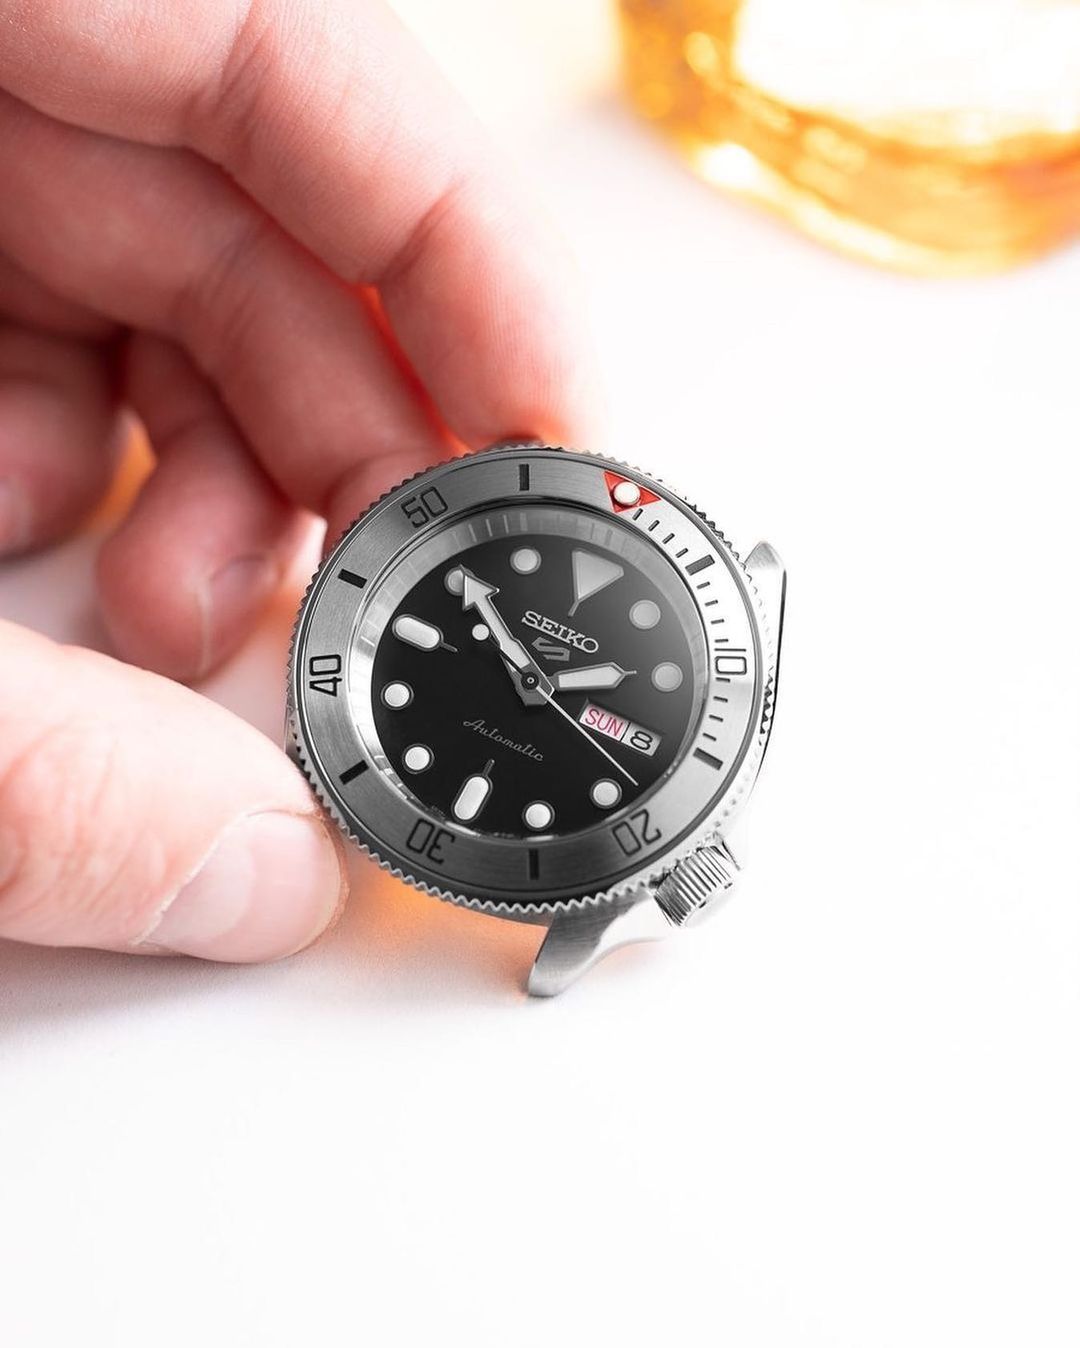 Bezel - SKX007/SRPD Coin Edge - Polished Steel - DLW WATCHES